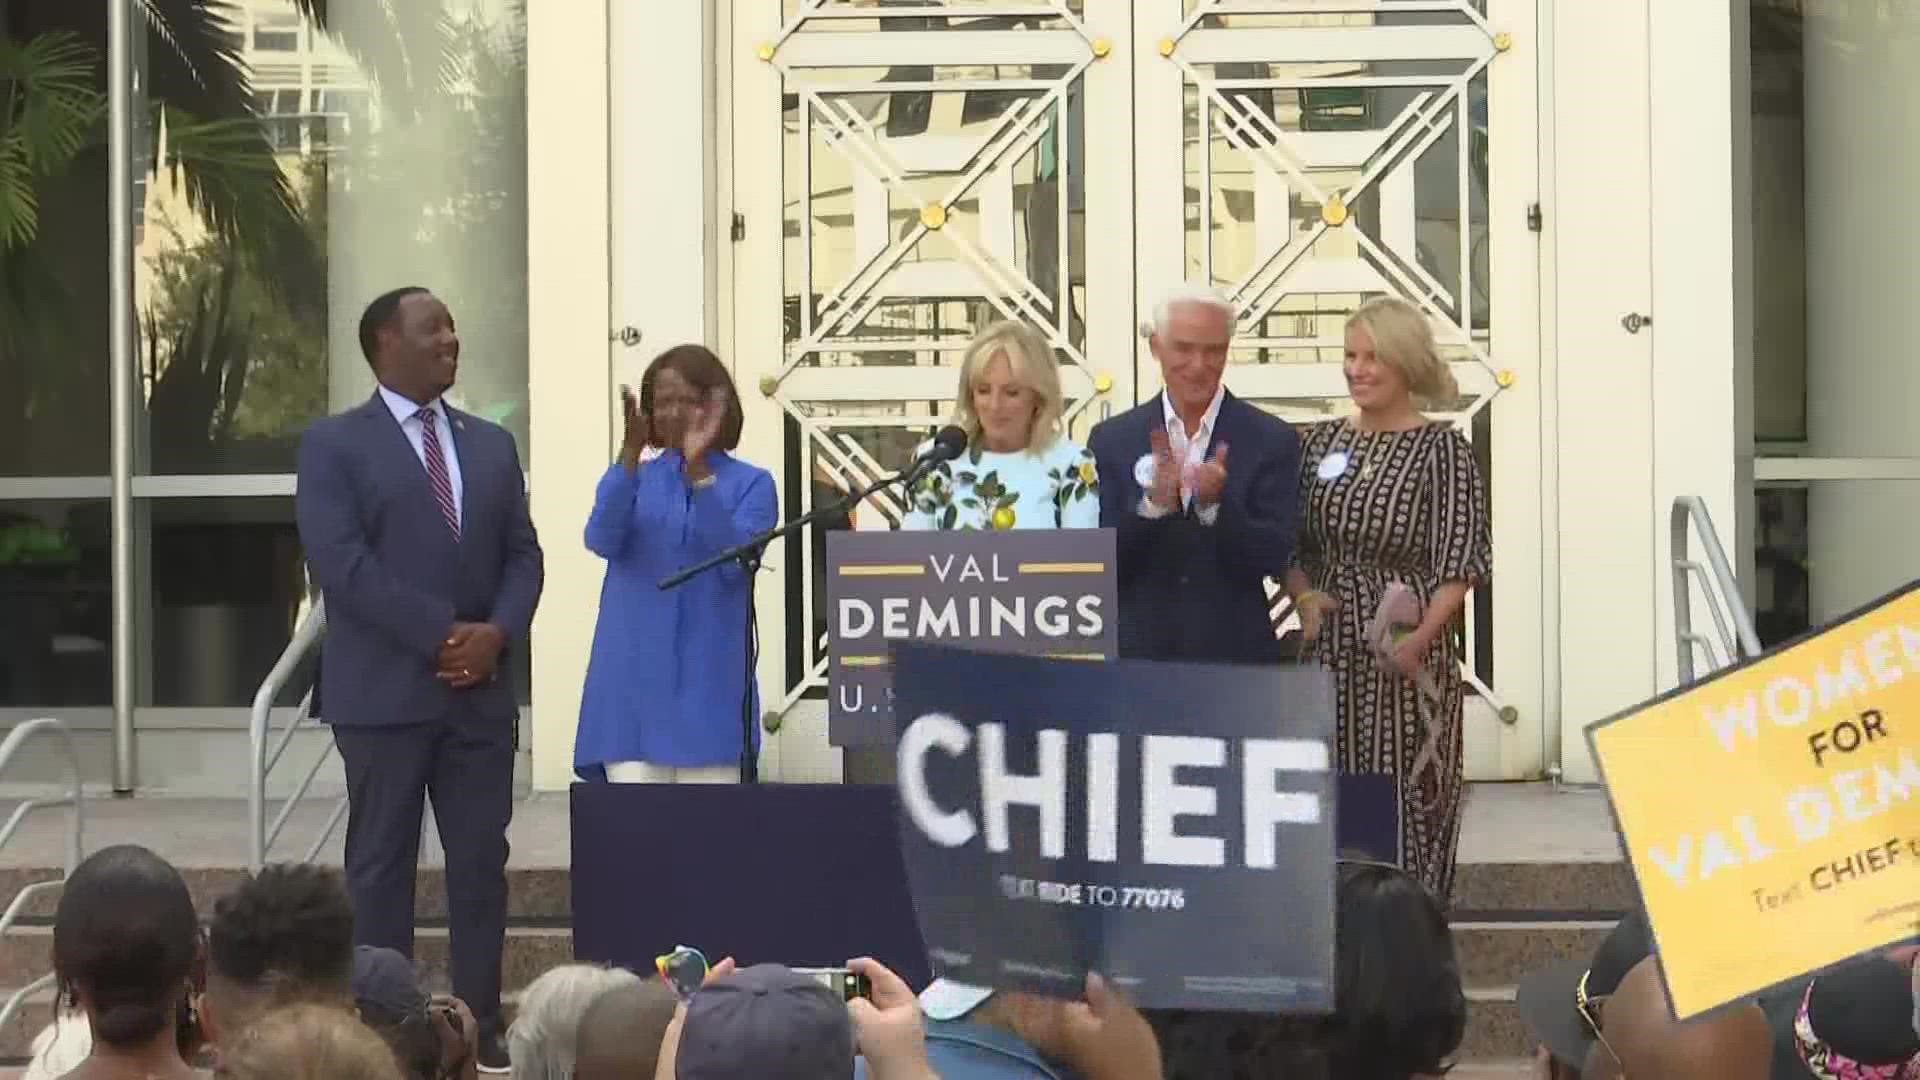 Dr. Jill Biden spoke about southwest Florida and her support for both Val Demings for U.S. Senate and Charlie Crist for Florida's governor in the election.